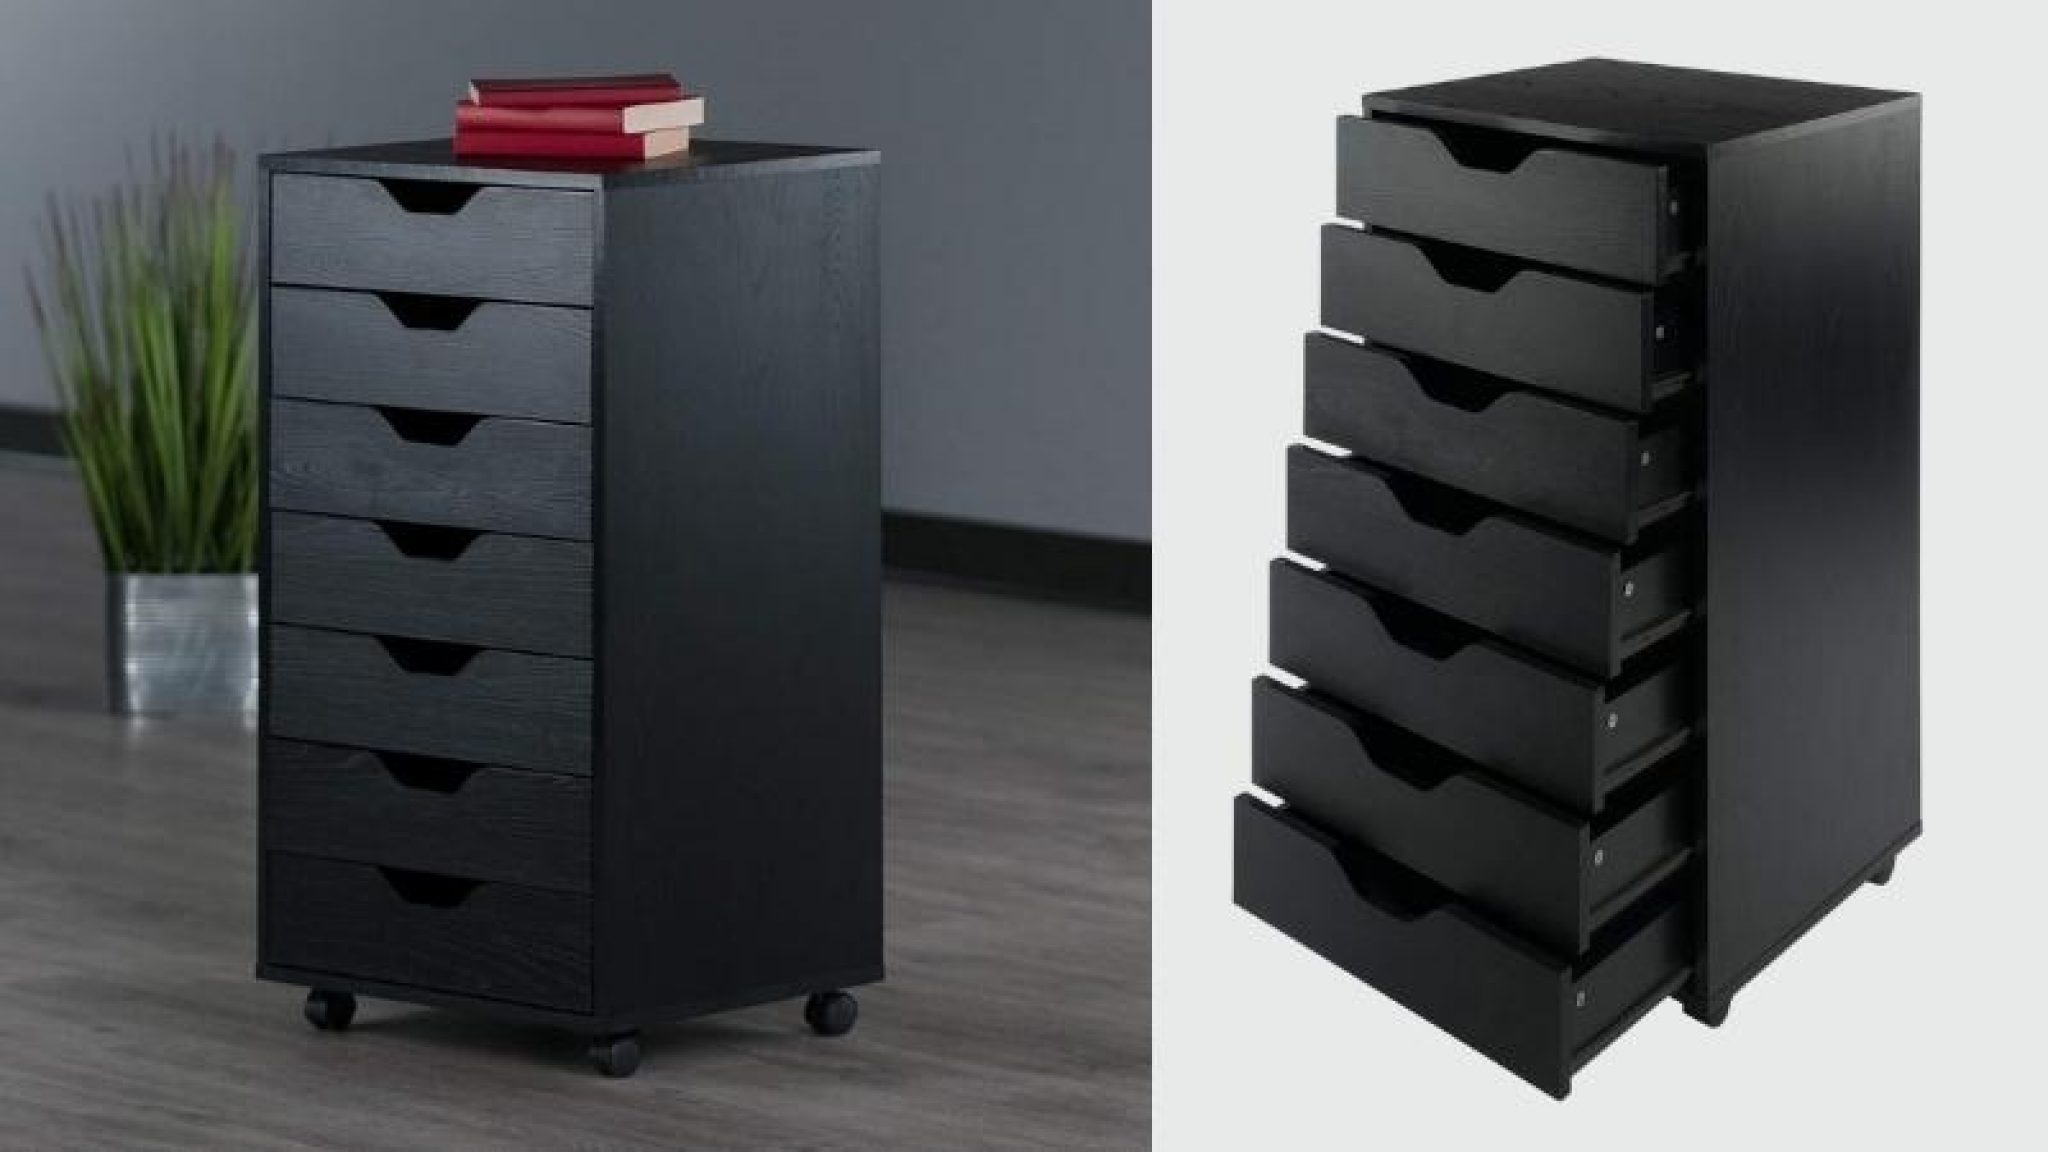 8 IKEA Alex Drawer Alternative The Perfect Solution for Small Spaces